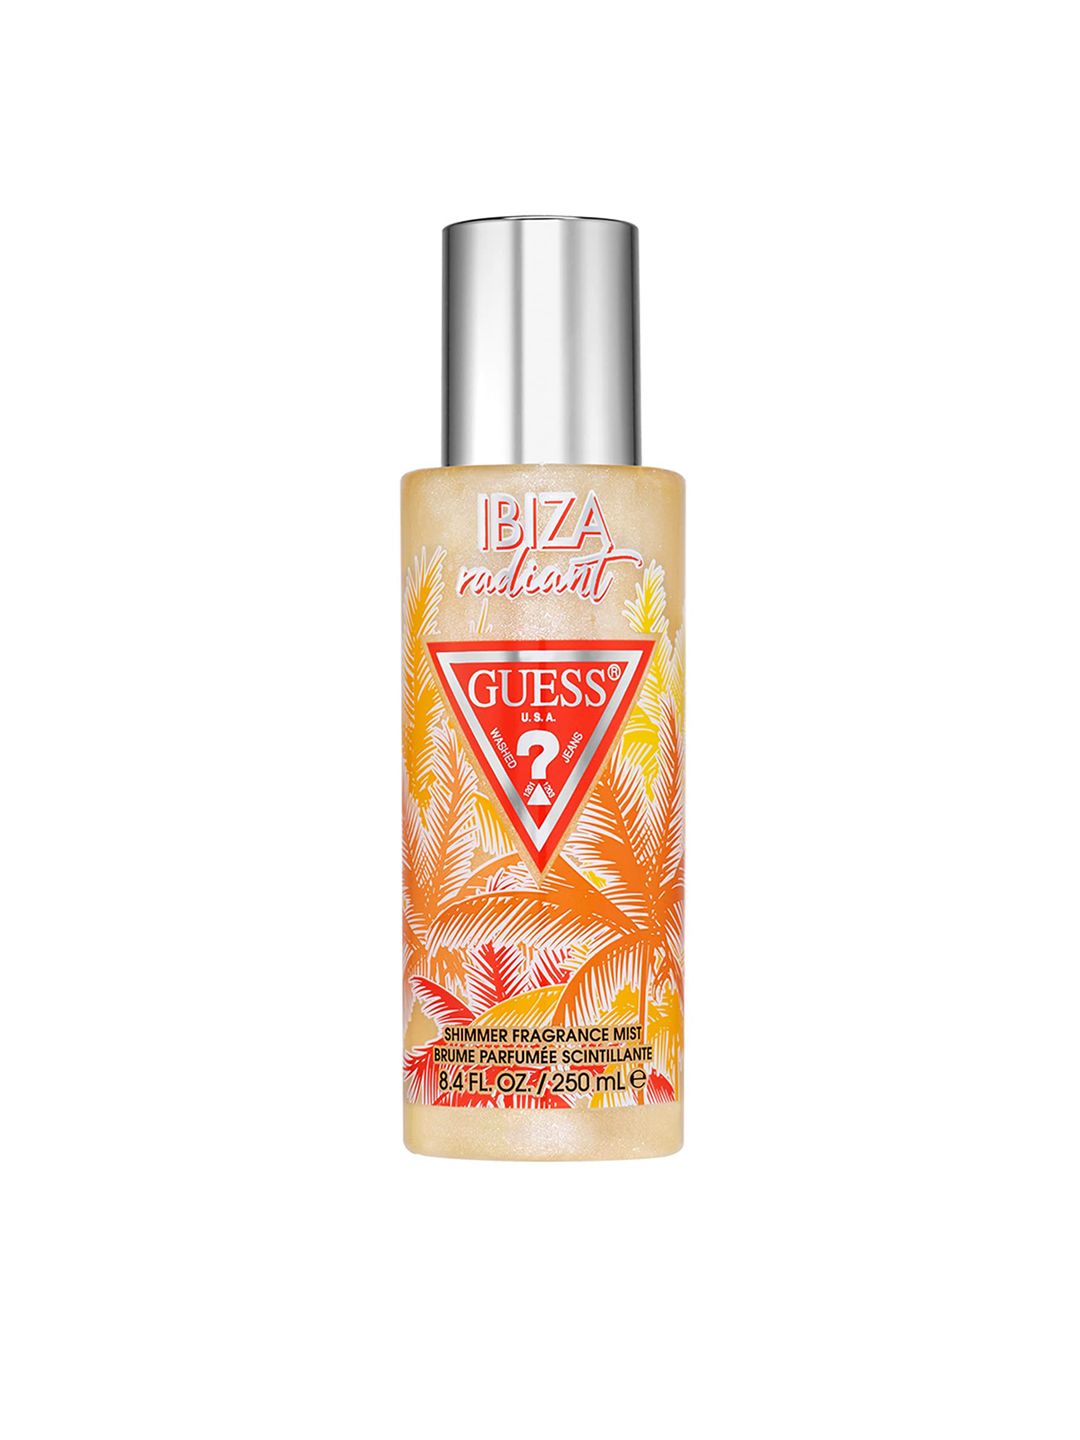 GUESS Destination Ibiza Radiant Shimmer Fragrance Body Mist - 250ml Price in India